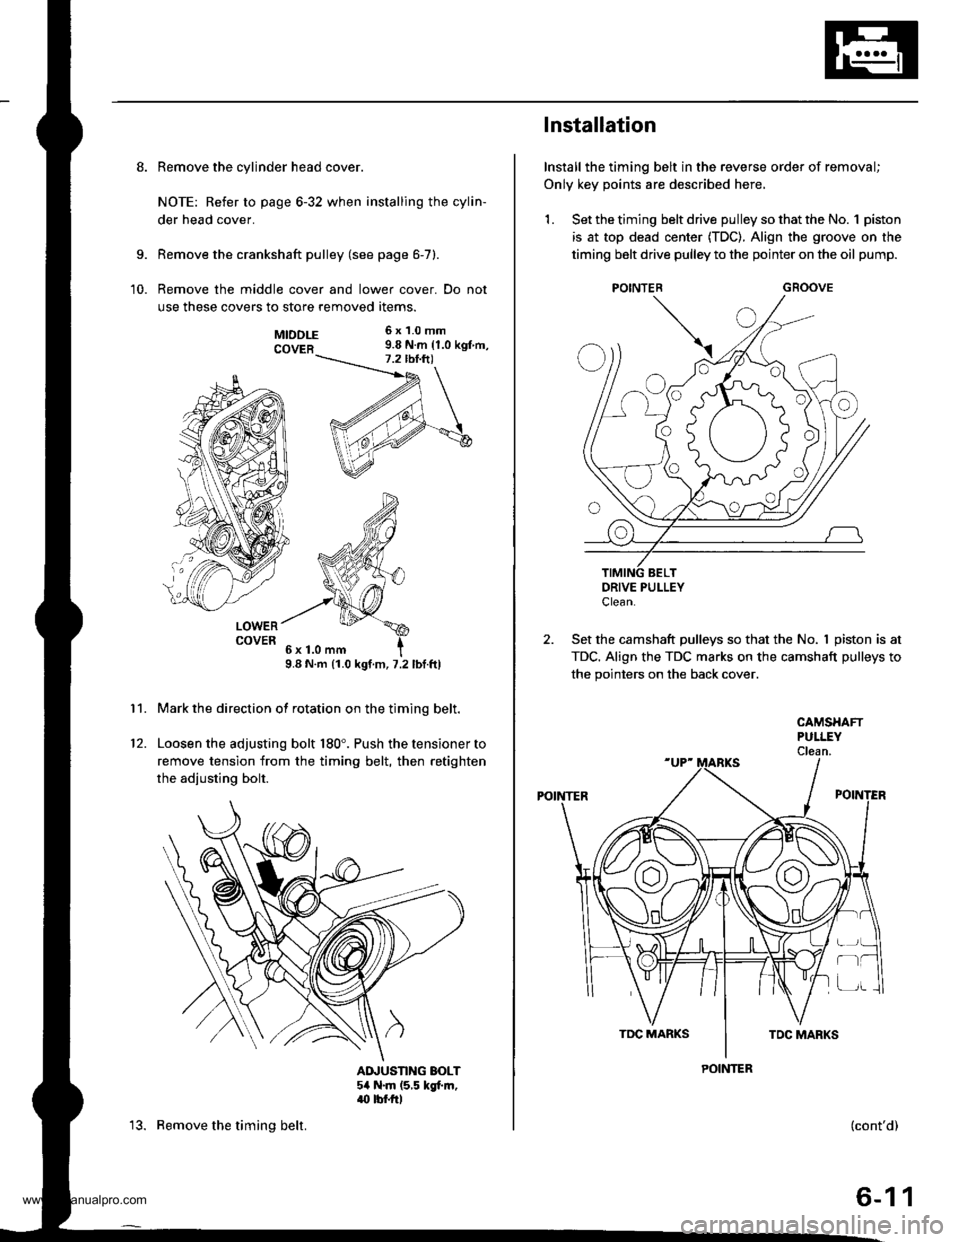 HONDA CR-V 1998 RD1-RD3 / 1.G Workshop Manual 
8. Remove the cylinder head cover.
NOTE: Refer to page 6-32 when installing the cylin-
der head cover.
Remove the crankshaft pulley (see page 6-7).
Remove the middle cover and lower cover. Do not
use